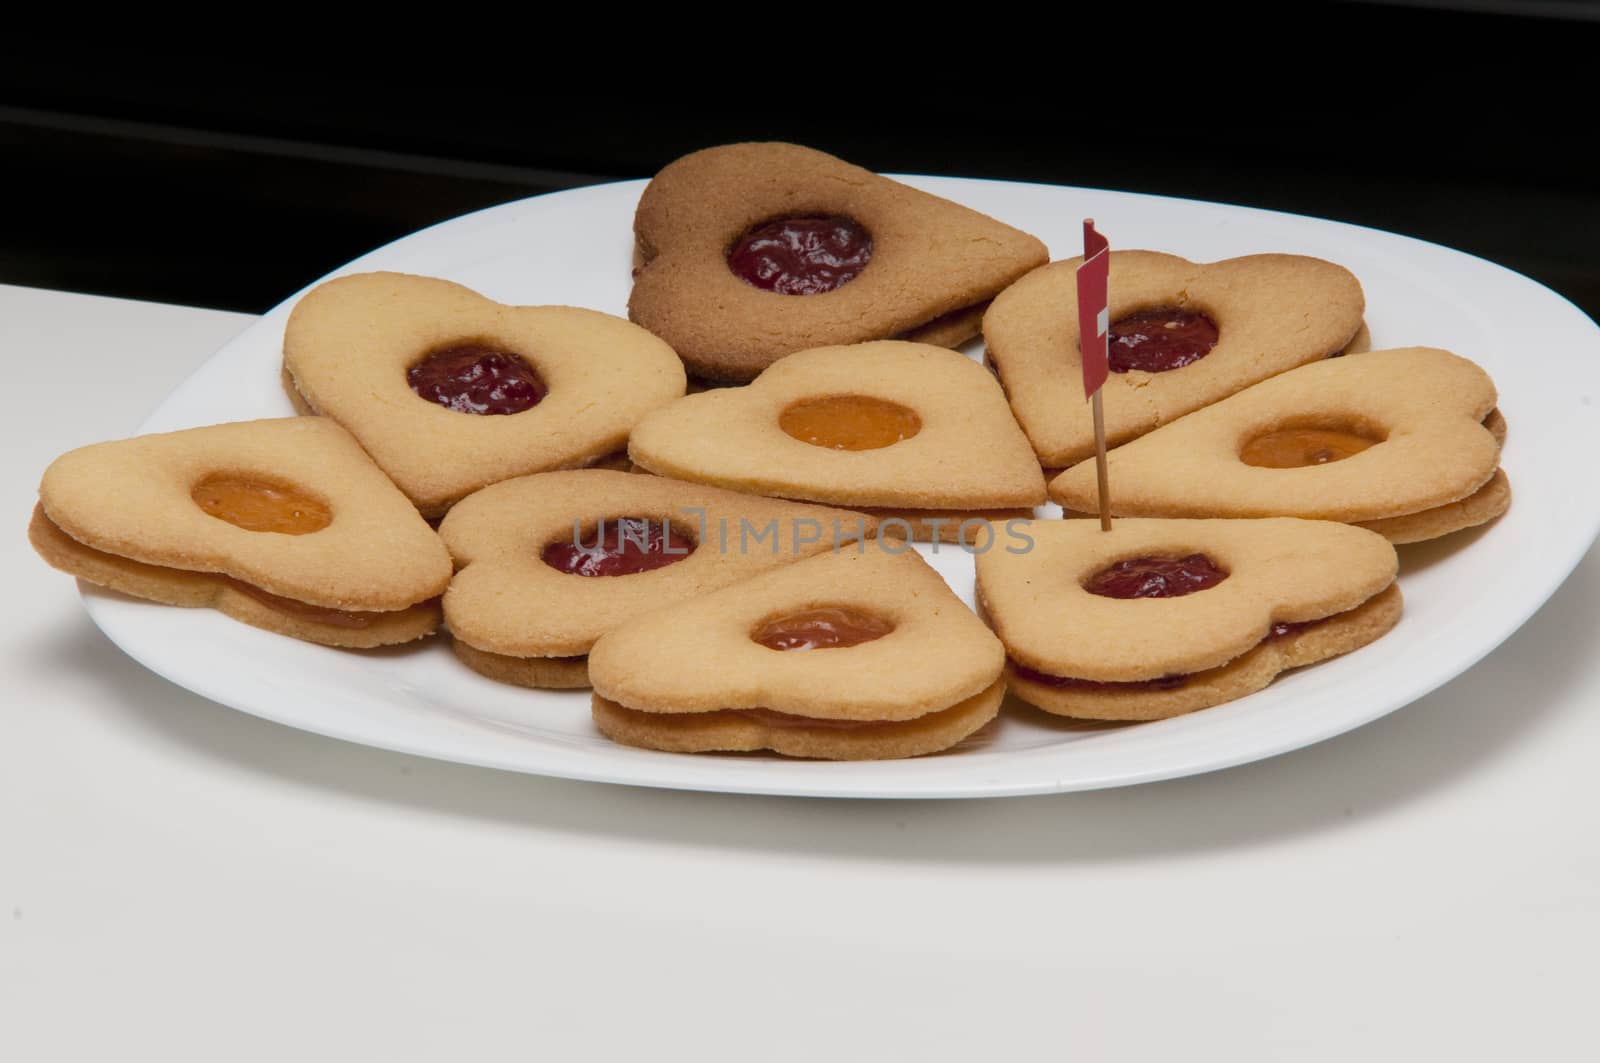 presentation of some round cookies and other heart-shaped